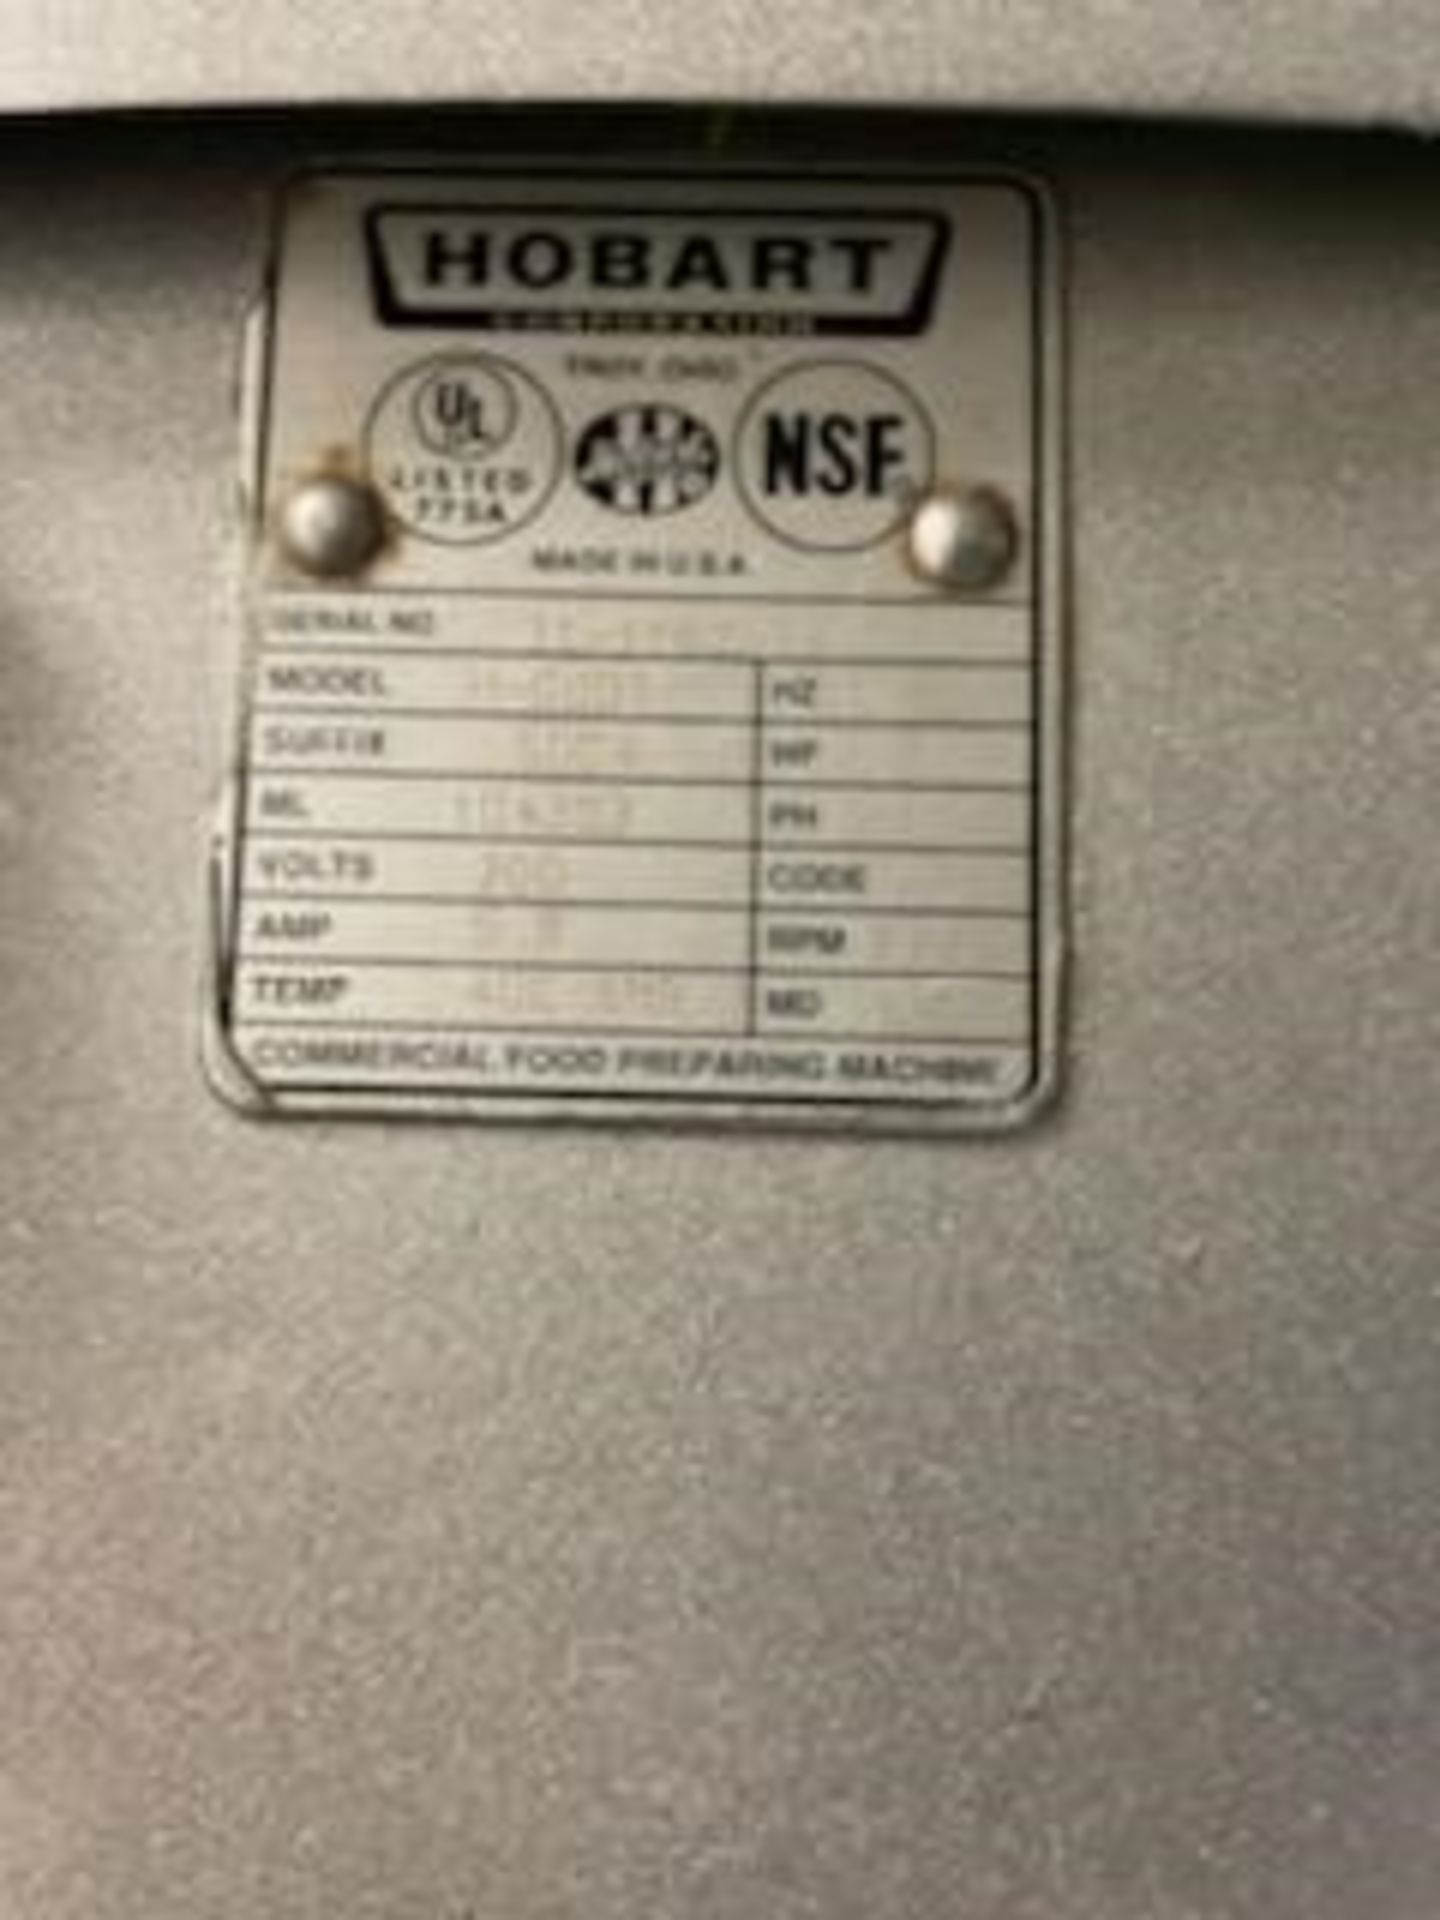 Hobart Planetary Mixer with Bowls and Attachments, Model: H-600T Low Hour, R&D, SN: 31-1162 - Image 2 of 3